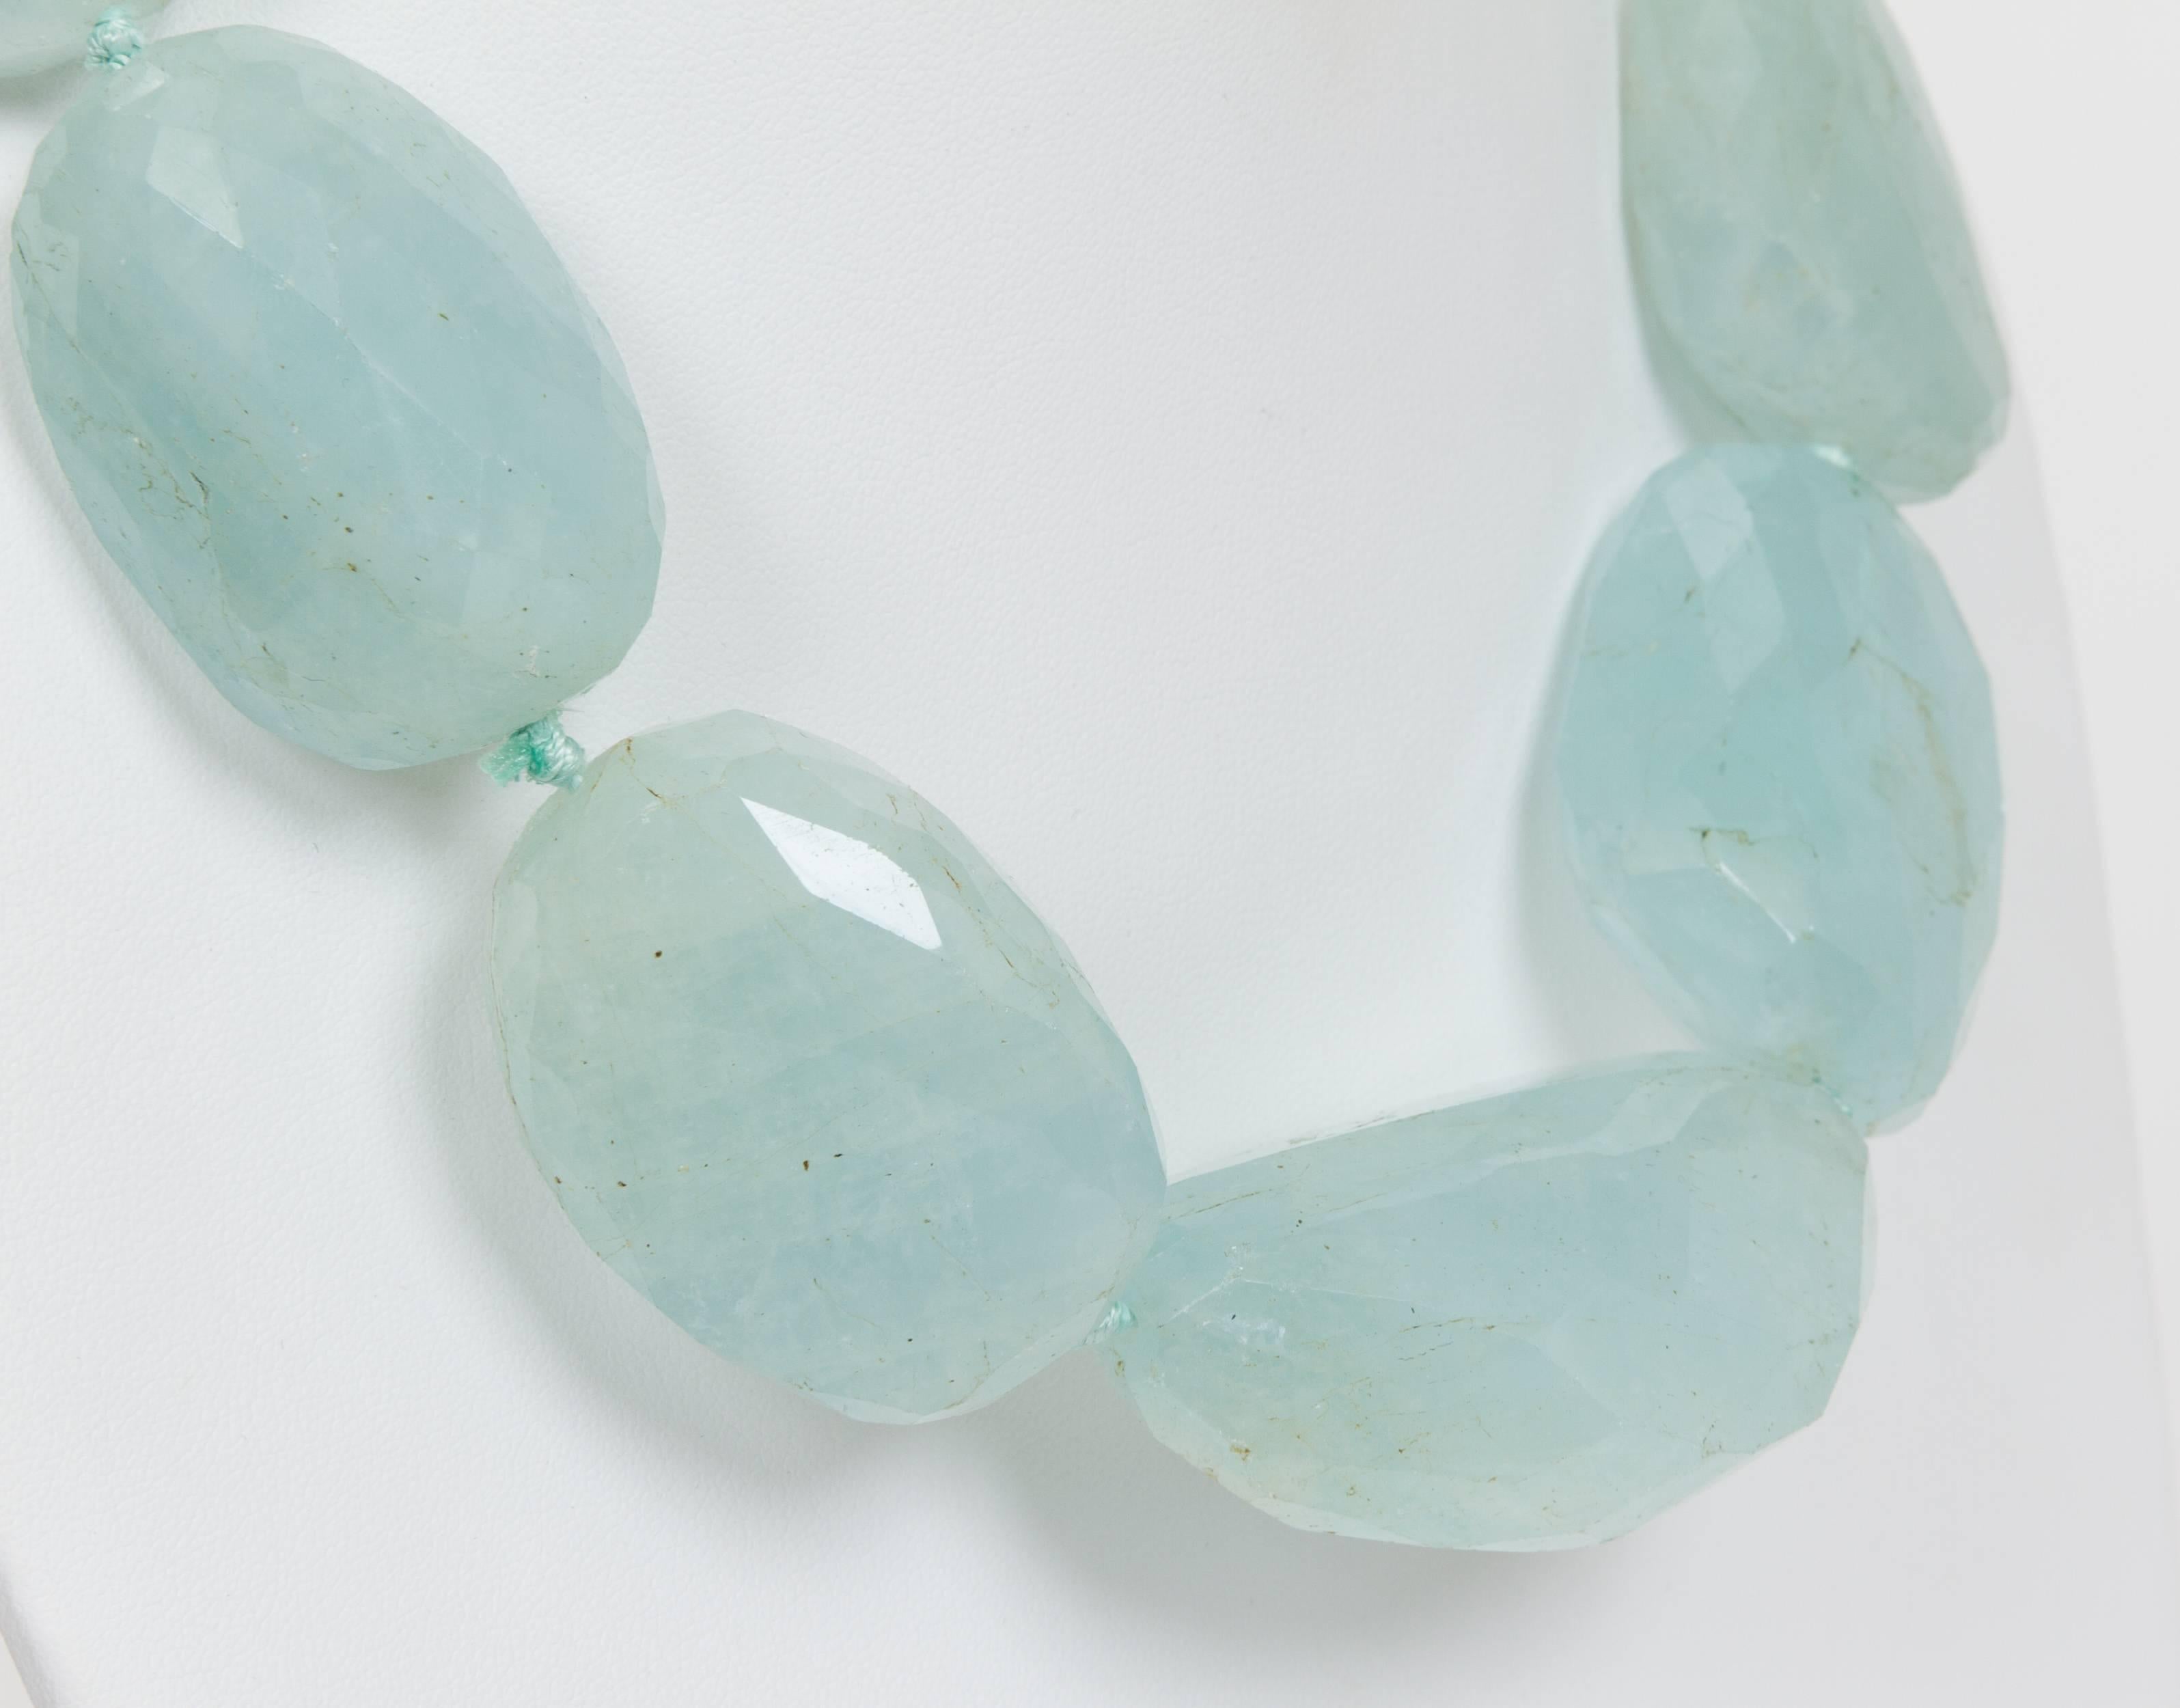 Iradj Moini oversized aqua faceted stones necklace. Comes with original pouch.